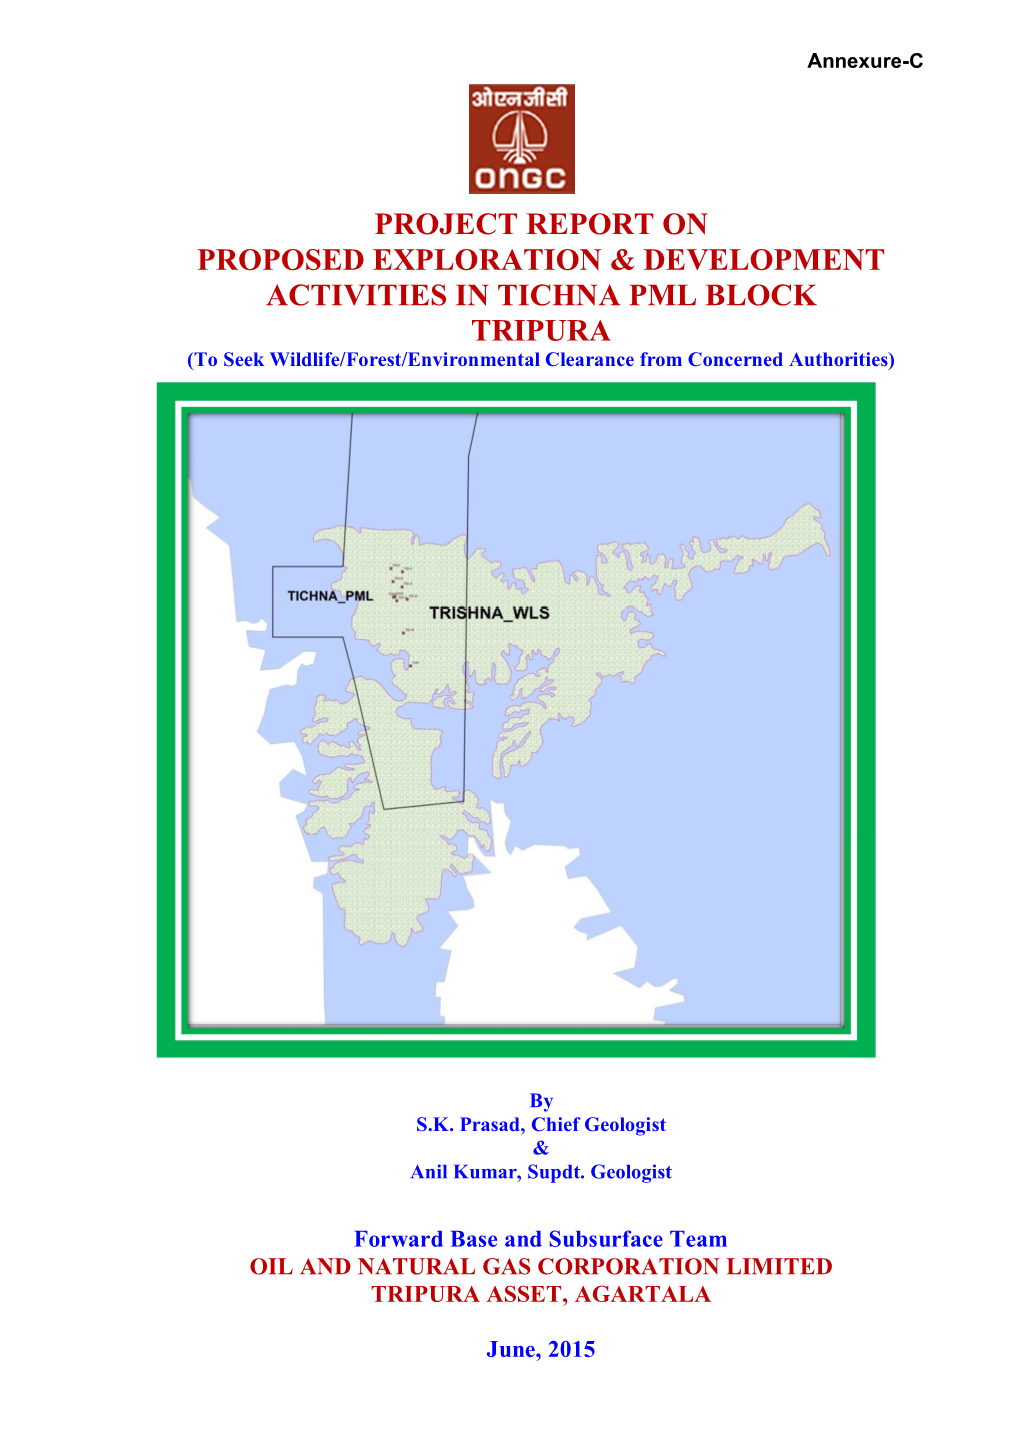 Project Report on Proposed Exploration & Development